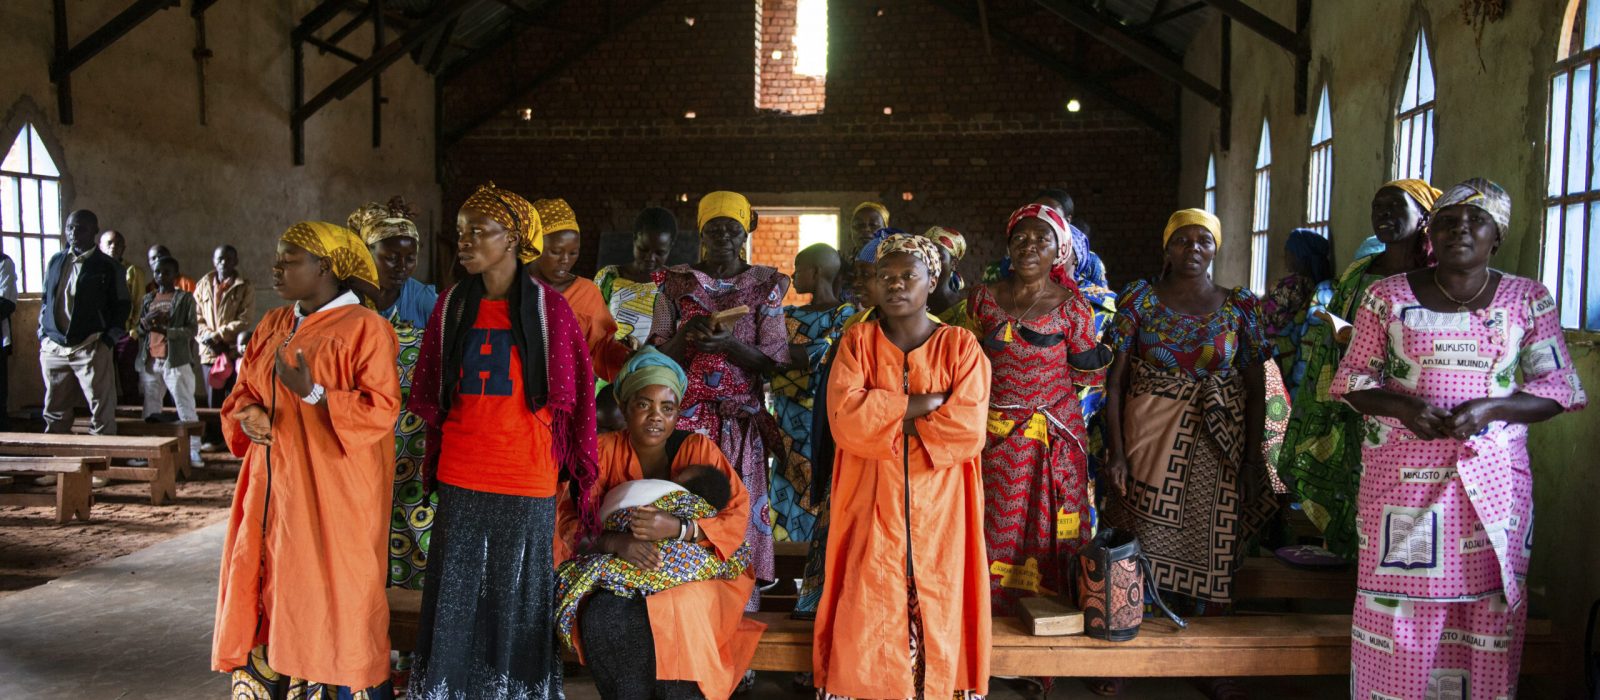 Women stand in a church service held in the parish of Kiwata village, Butembo, Democratic Republic of Congo, on 12 December 2021. Tearfund Canada continues to support several training and outreach programmes, with the help of CBCA, in the Democratic Republic of Congo in order to assist vulnerable communities out of poverty.